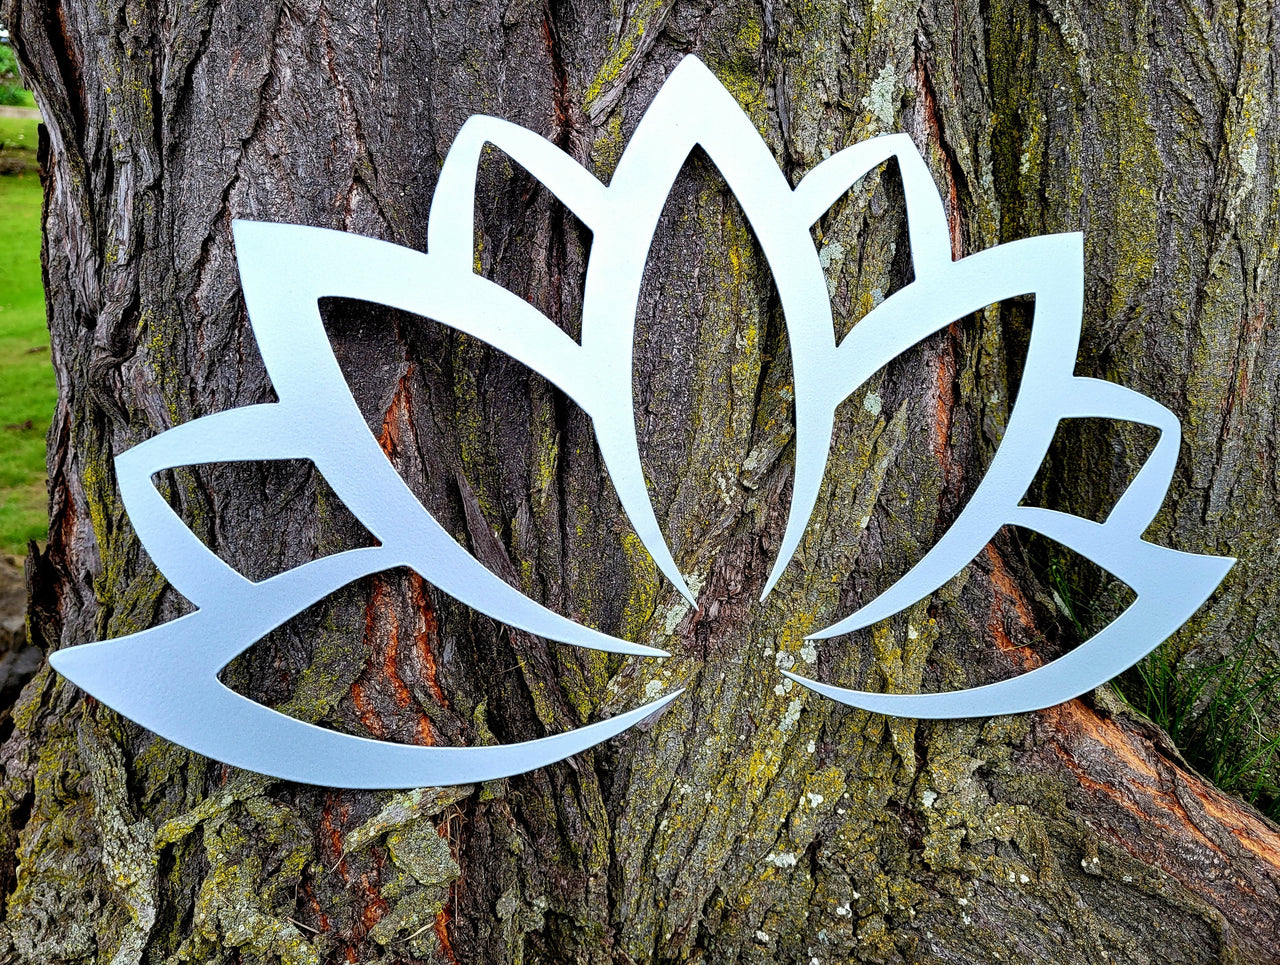 Silver metal lotus flower design sitting against a large tree trunk.